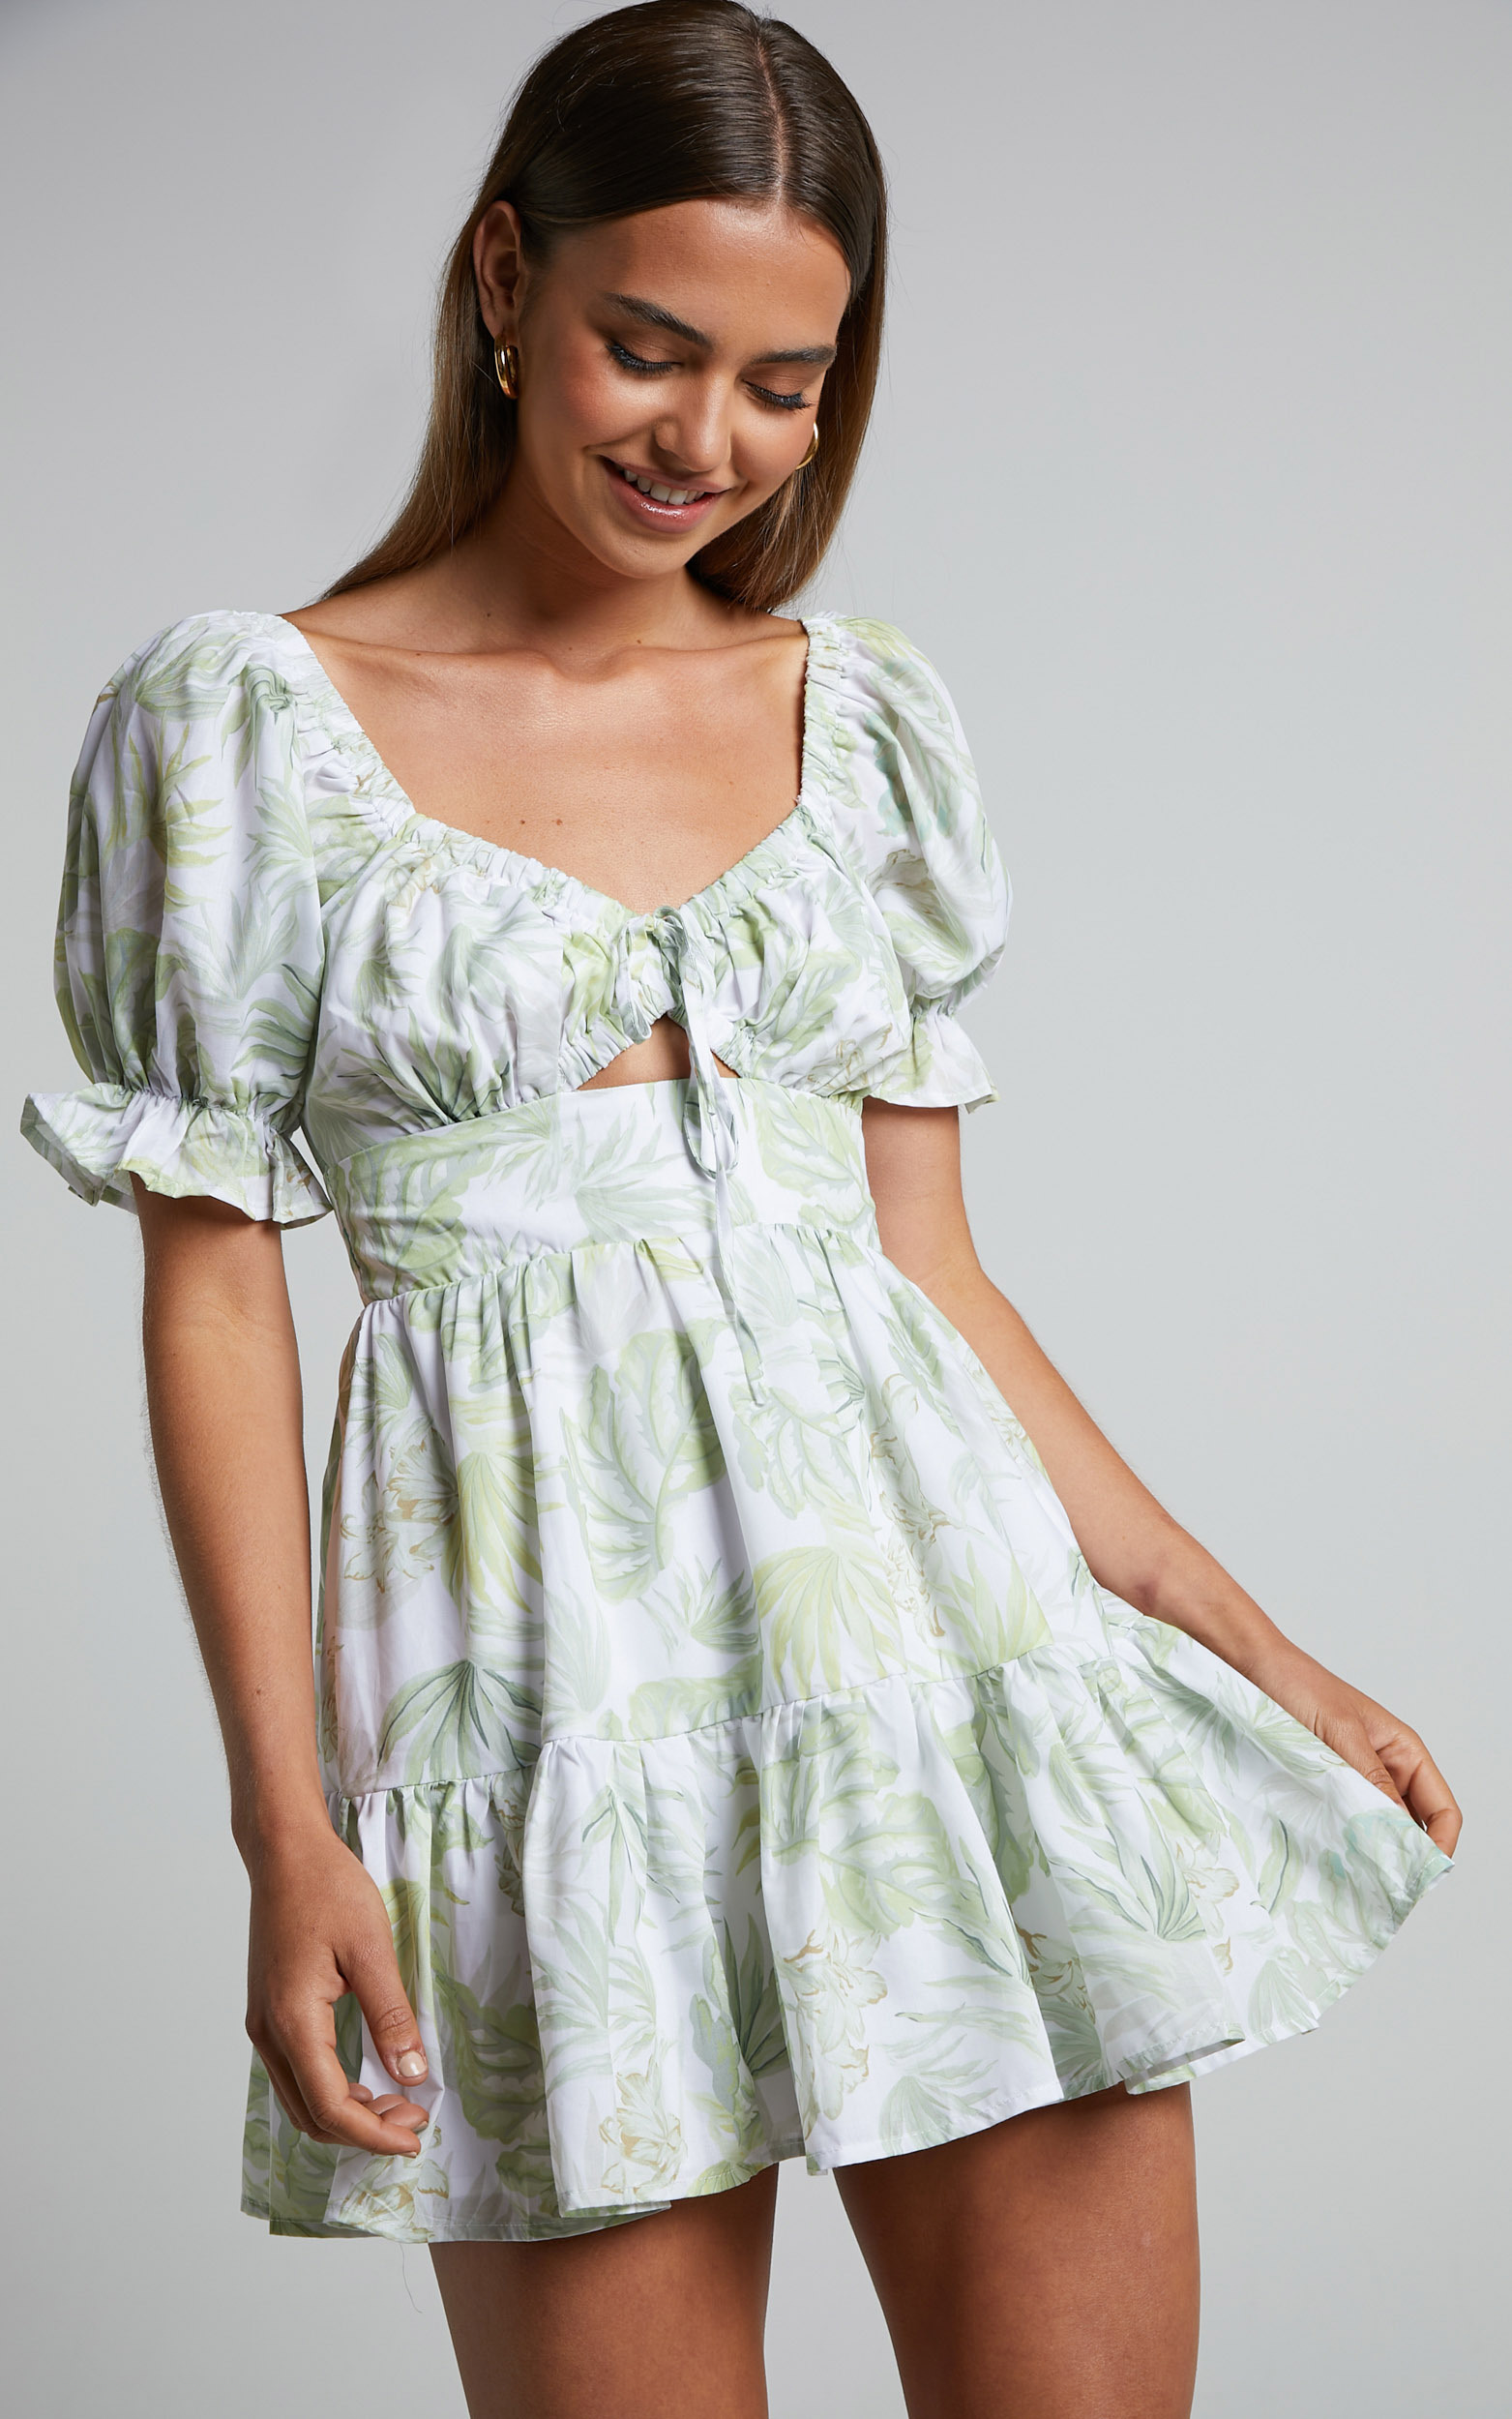 Jorina Mini Dress - Puff Sleeve Cut Out Dress in TROPICAL PALM - 04, MLT1, hi-res image number null